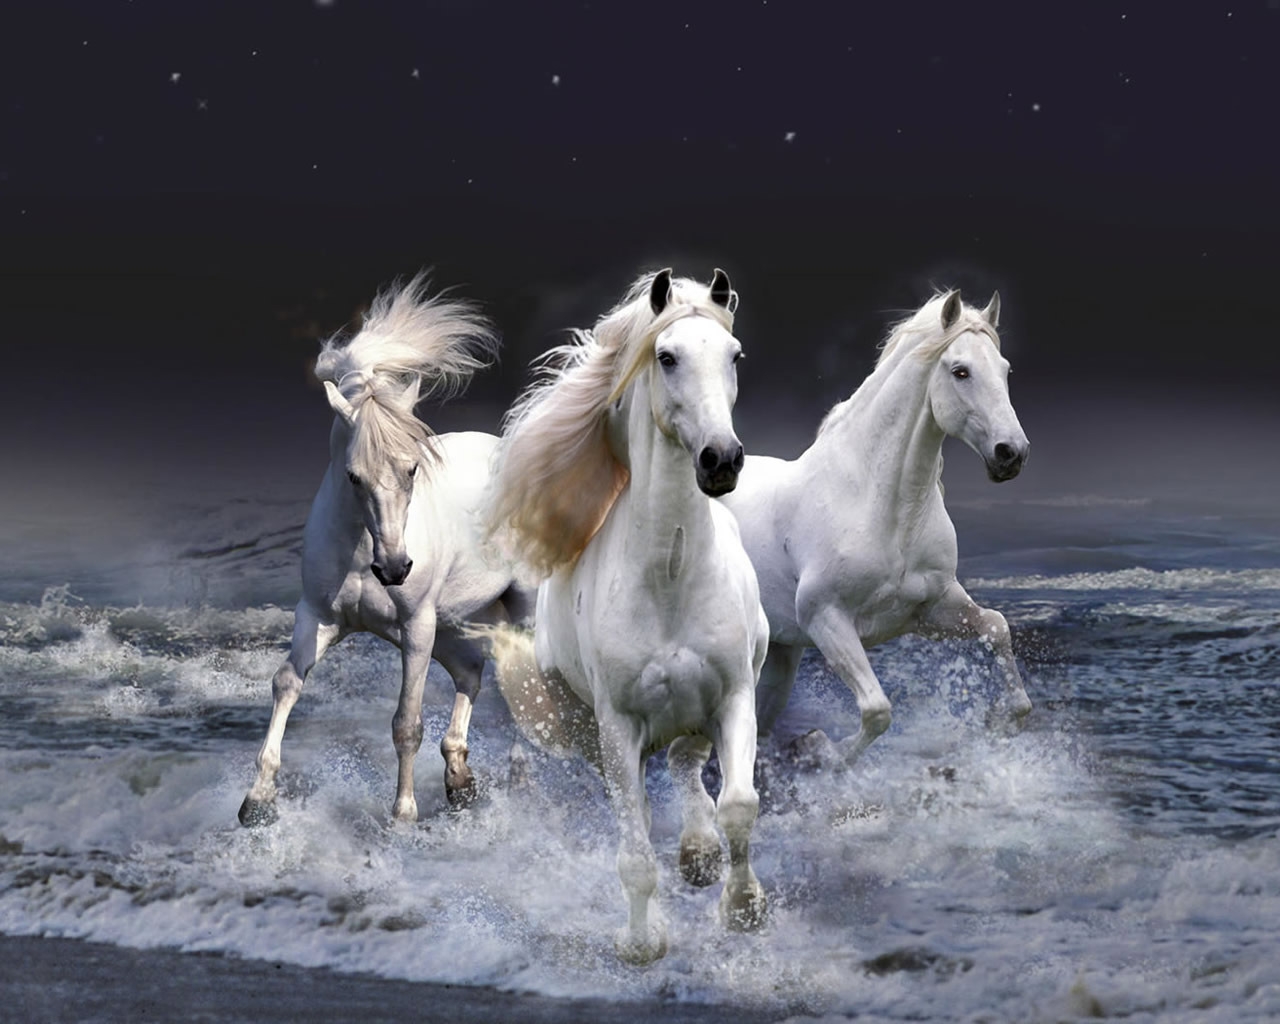 Three White Horses for 1280 x 1024 resolution